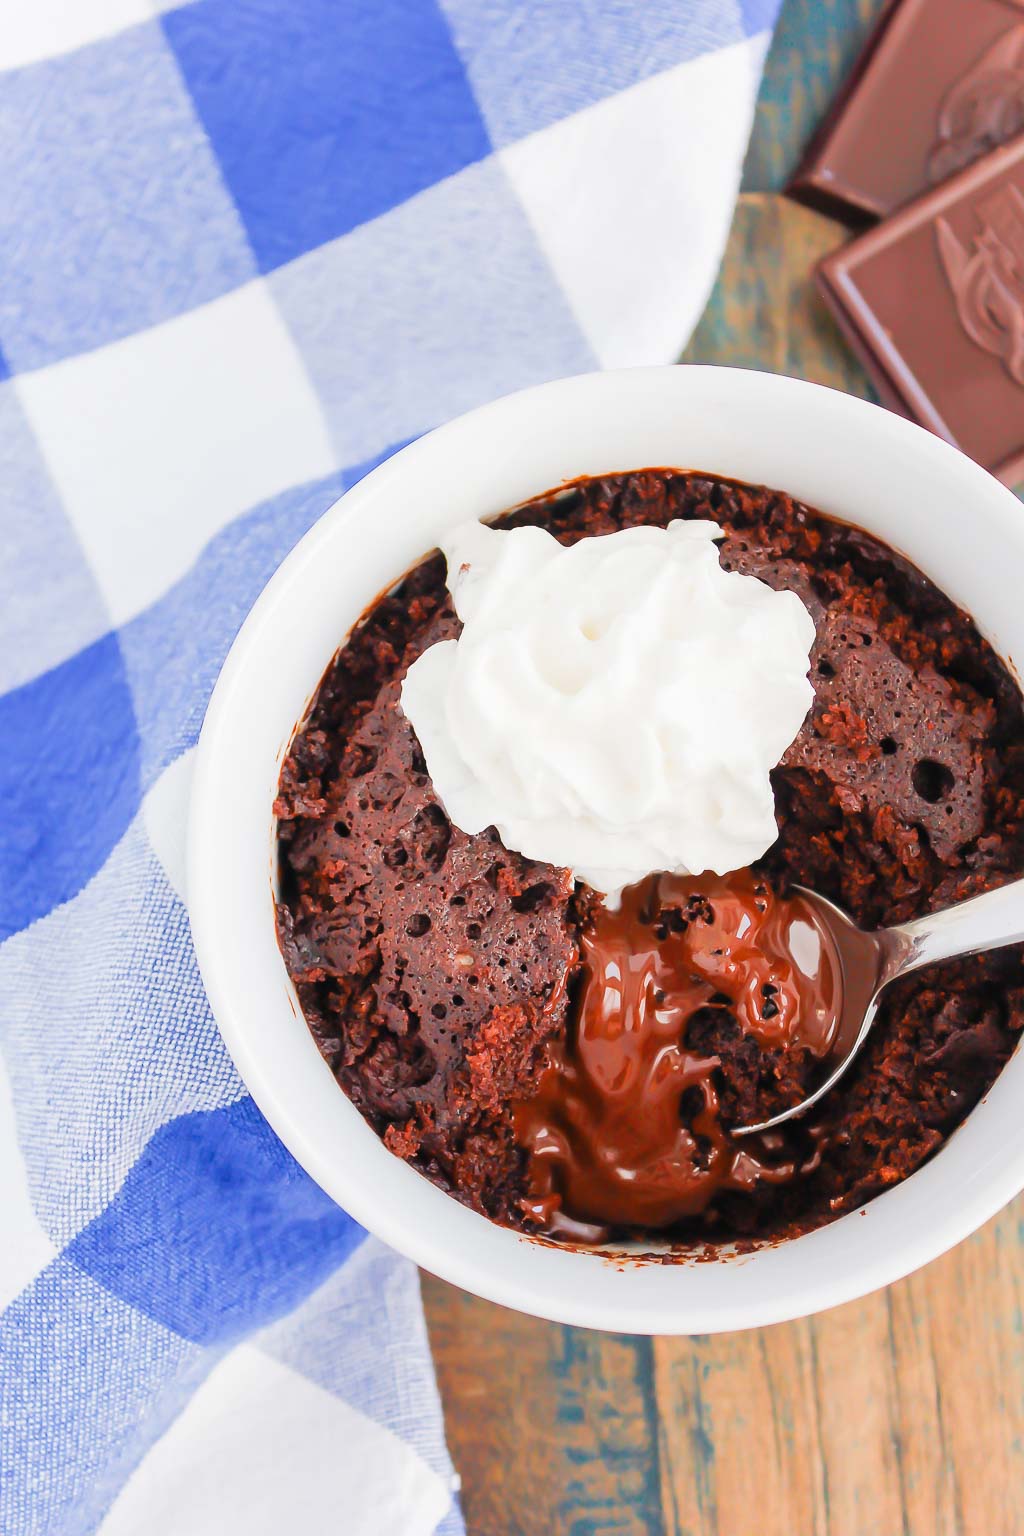 Chocolate Lava Mug Cake is moist and fudgy, with a warm molten center. Made in the microwave and ready in minutes, this easy treat is perfect for chocolate lovers!